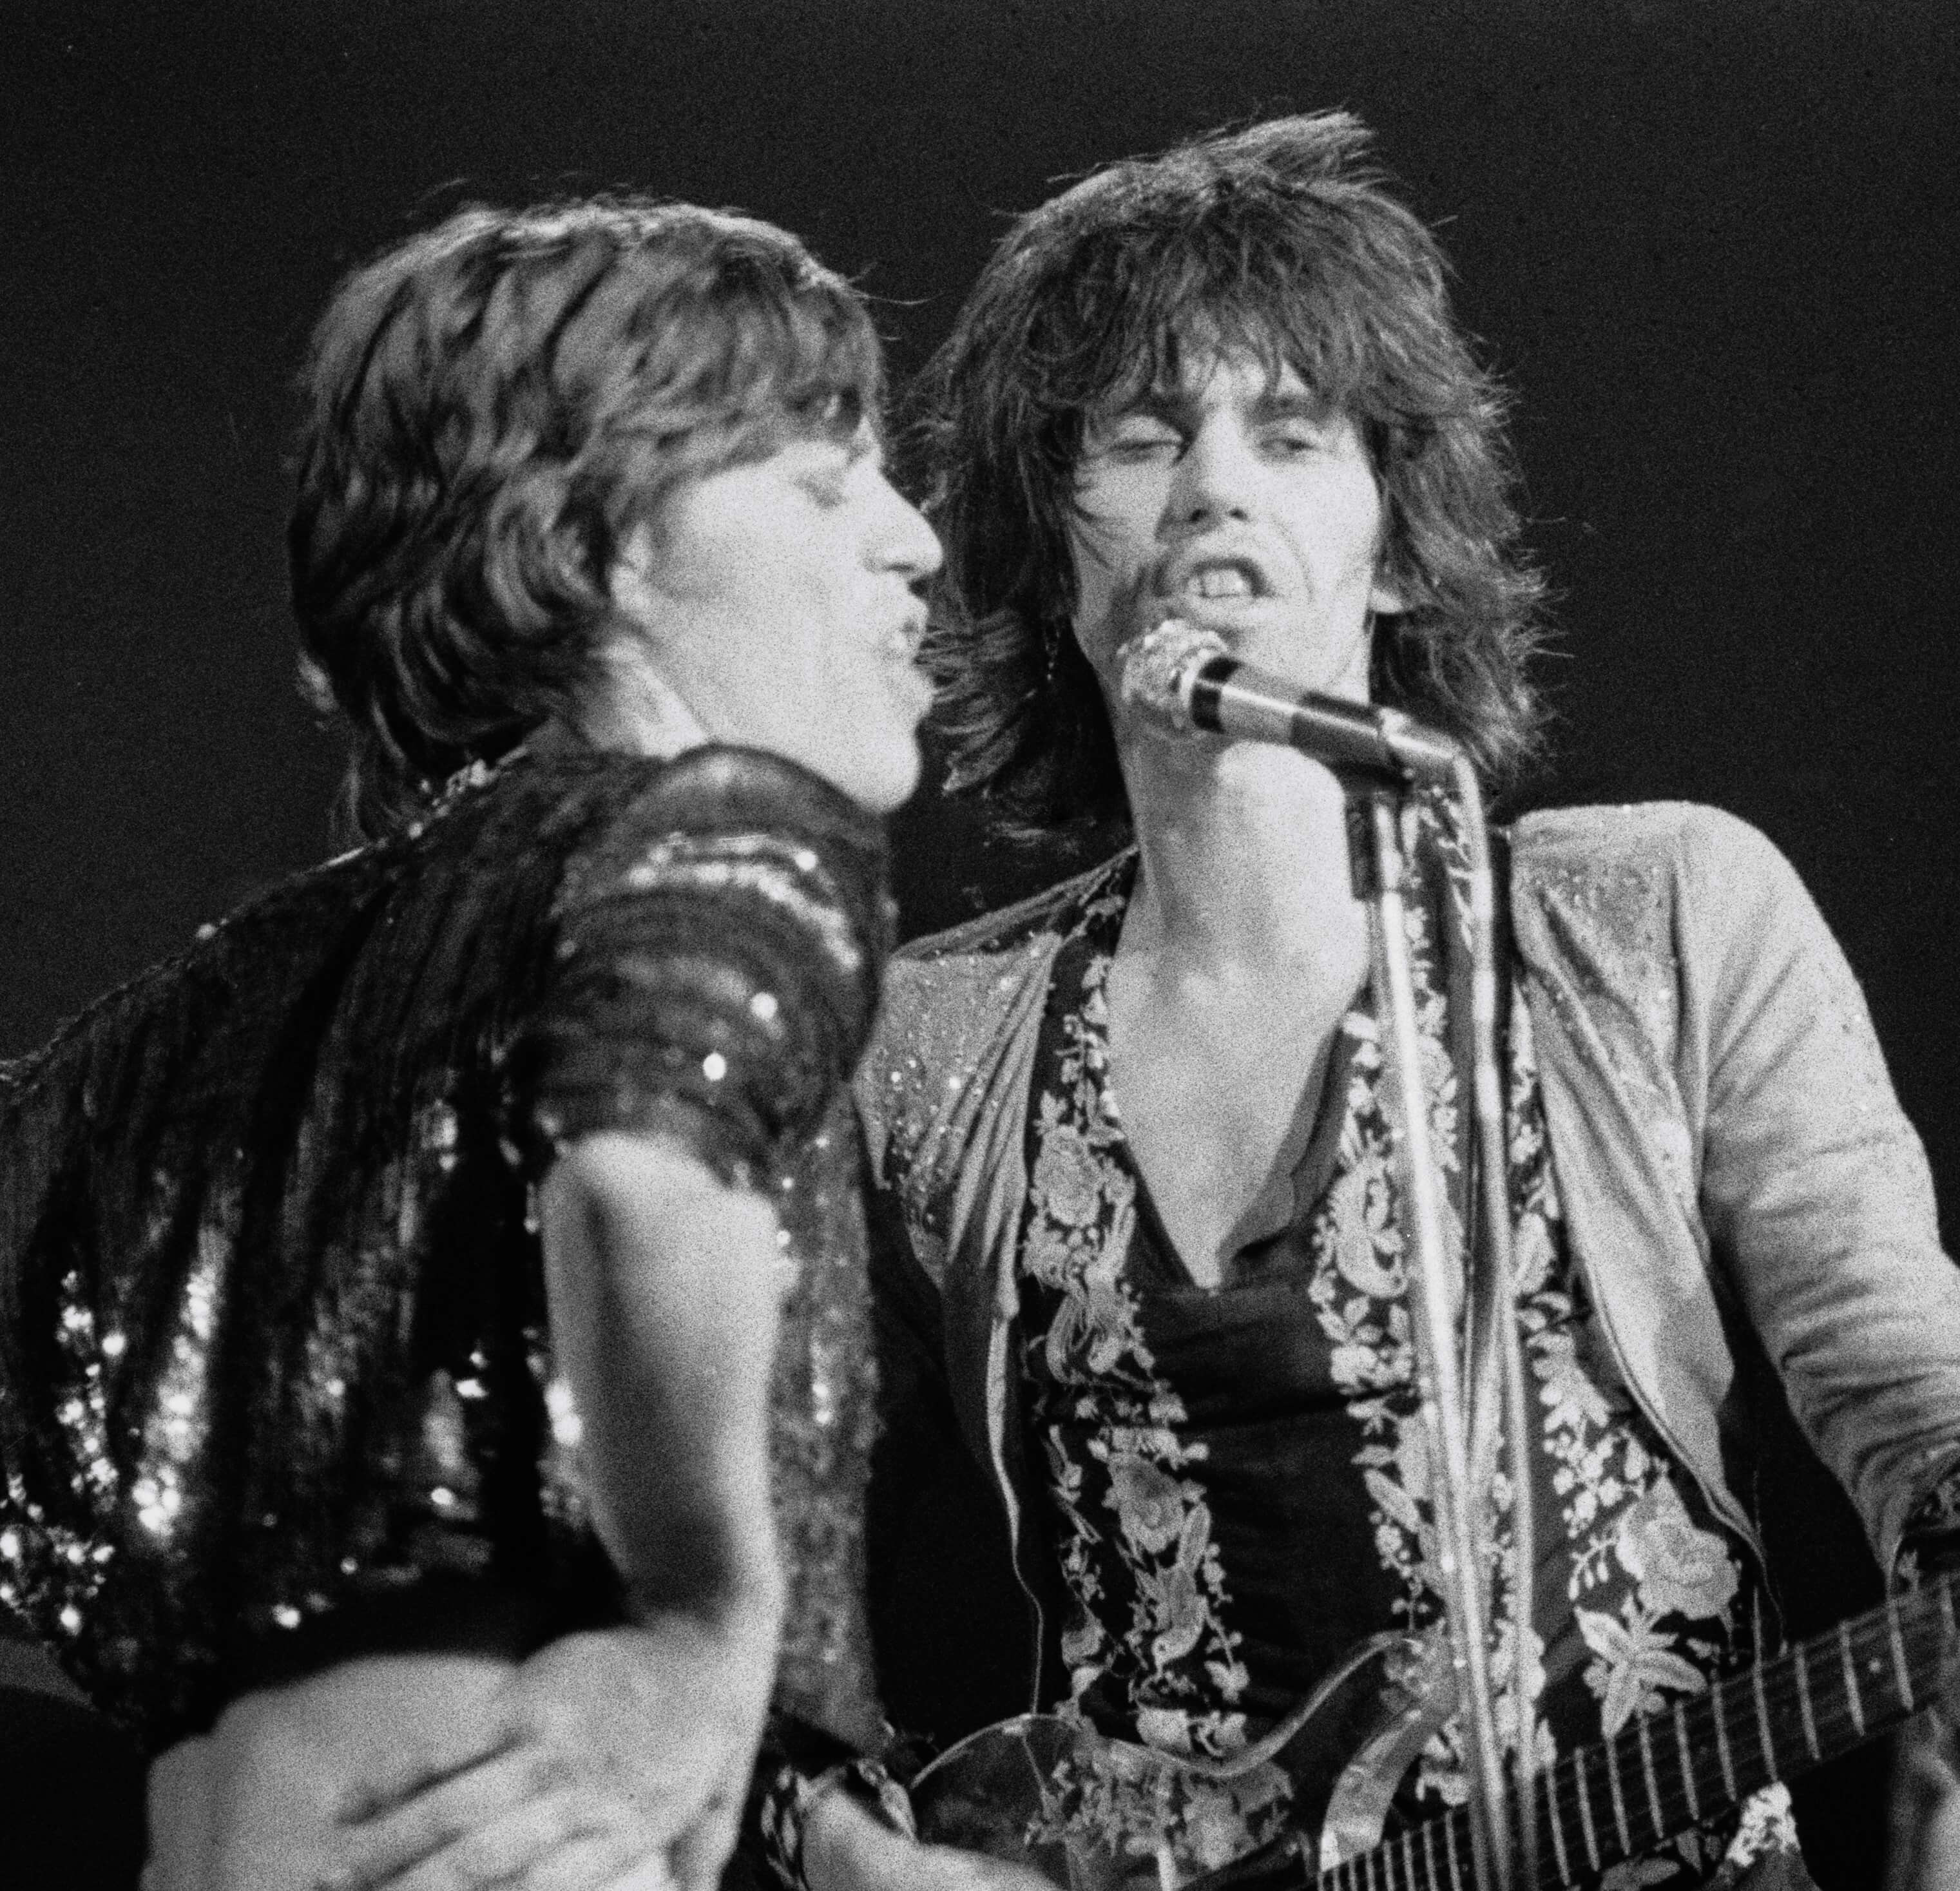 The Rolling Stones' Mick Jagger and Keith Richards in black-and-white